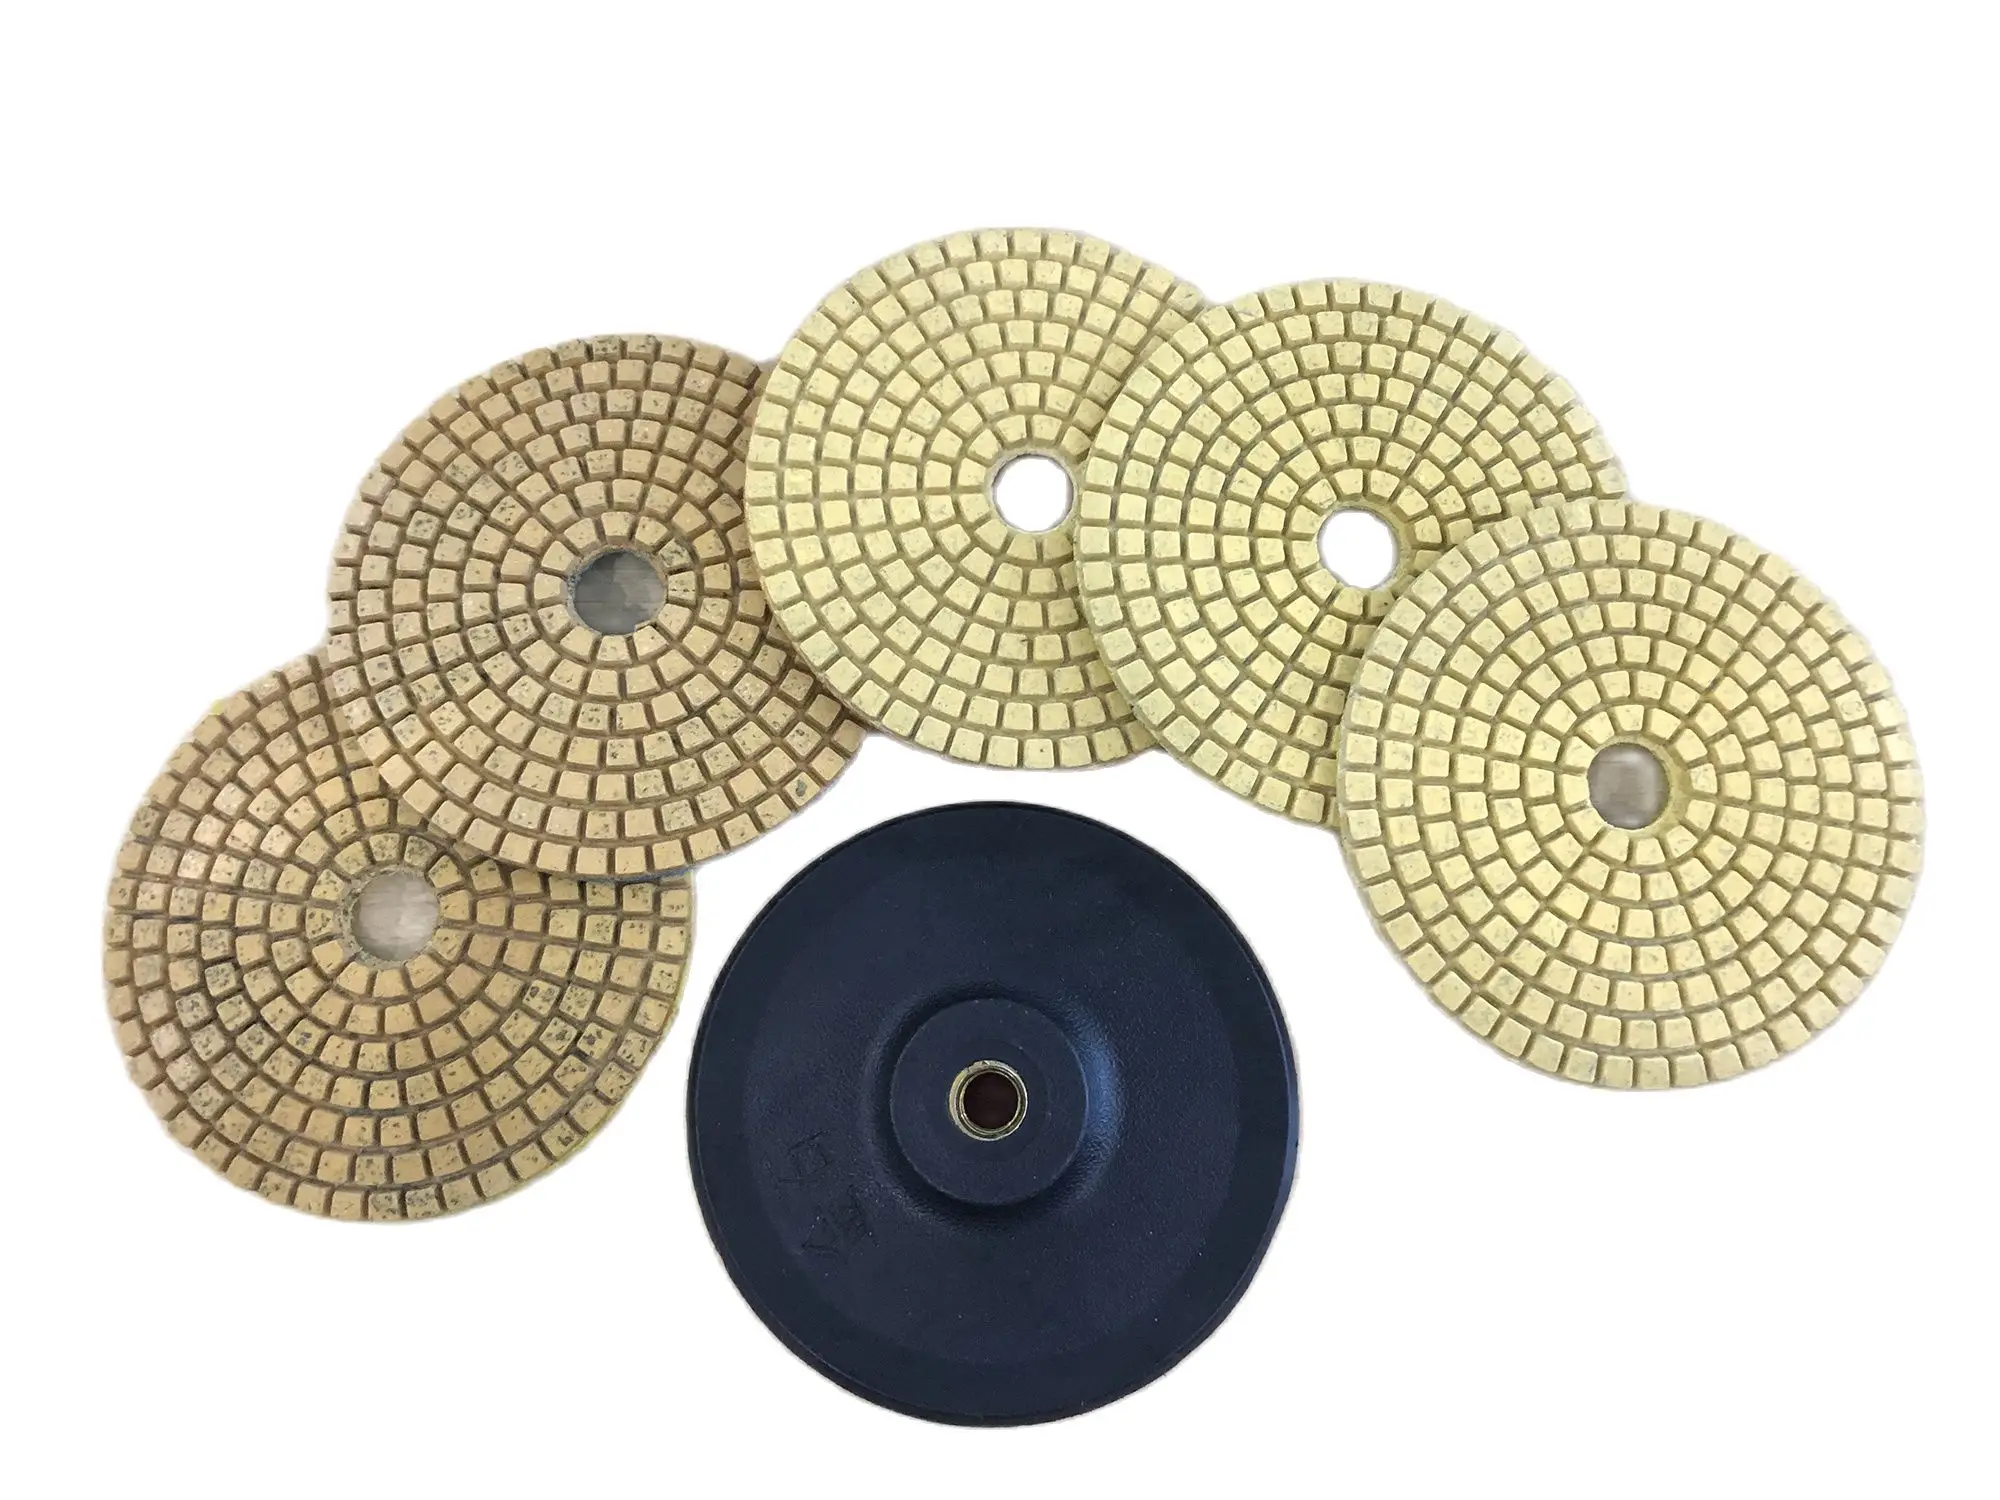 5PCS 4 inch Flexible Diamond Wet Metal Polishing Pad And 1 M14 Backer For Grinding And Cleaning Stone Granite Marble Concrete